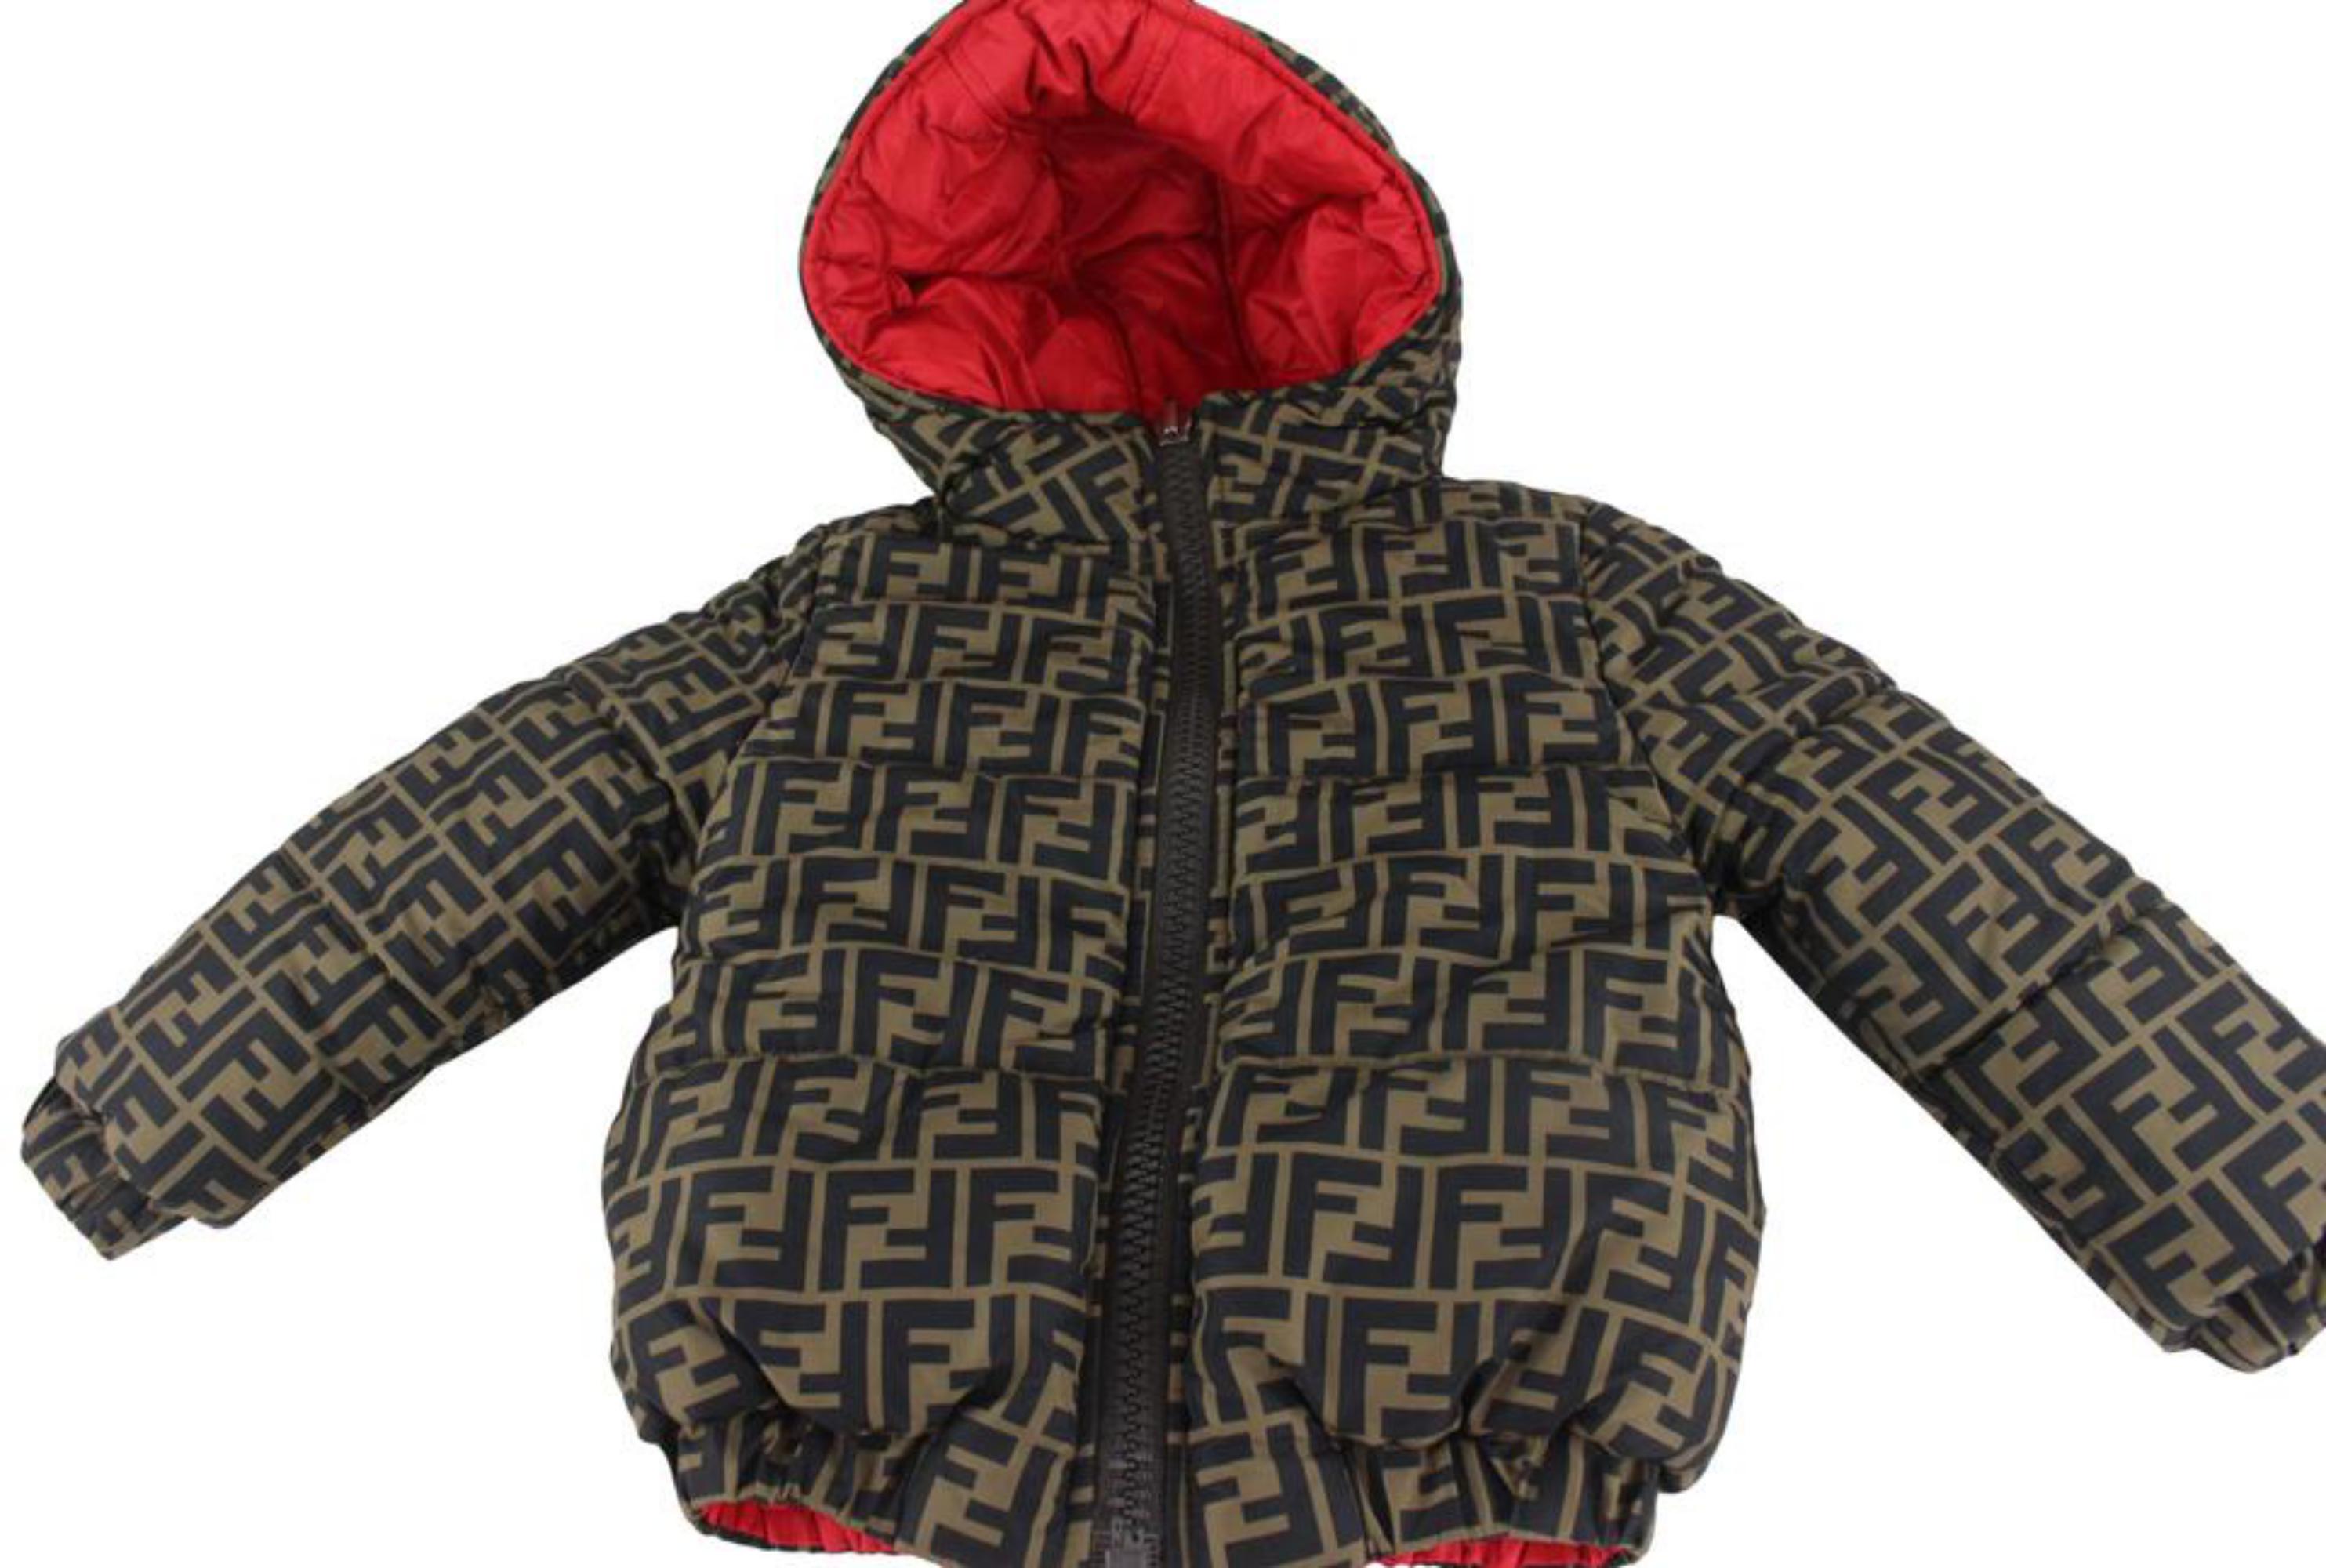 Fendi Toddler Size 3T Monogram x Red Puffer Coat Puffy Jacket Toddler 0FF22
Date Code/Serial Number: CA057030791
Made In: Italy
Measurements: Length:  13.5